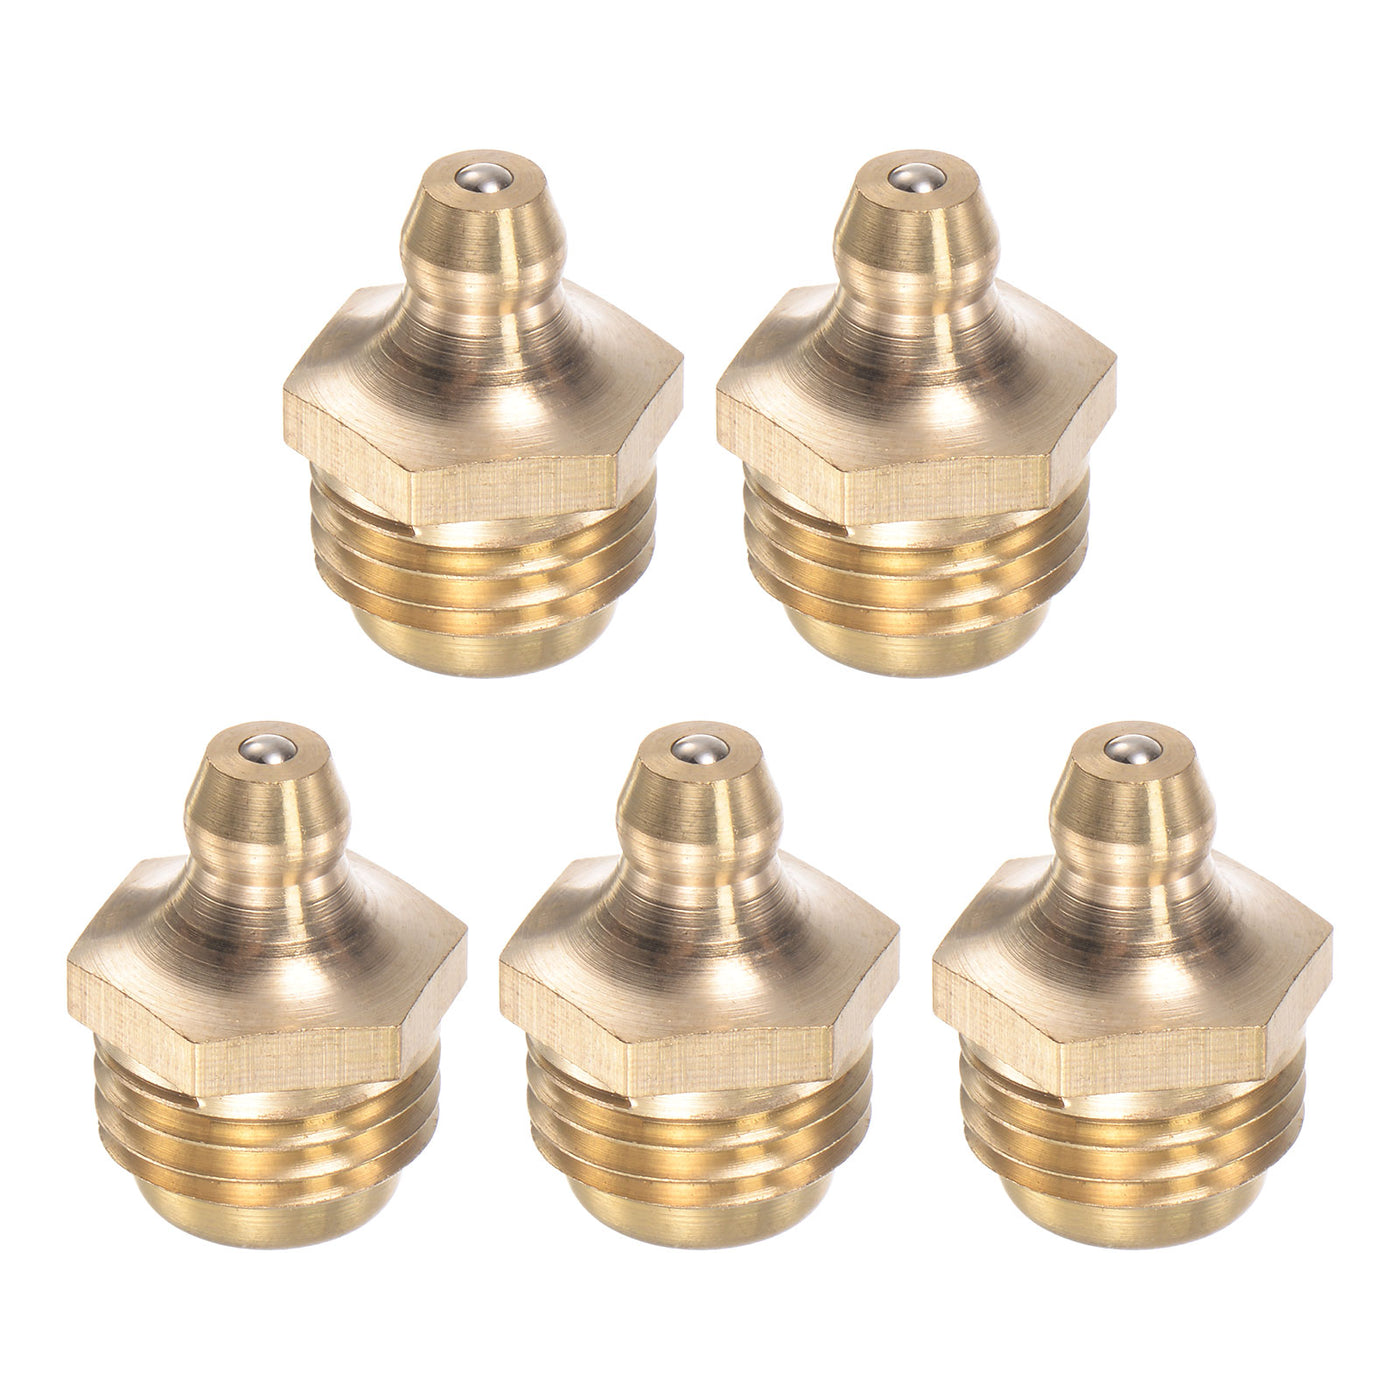 Uxcell Uxcell Brass Straight Hydraulic Grease Fitting Accessories M12 x 1.5mm Thread, 5Pcs